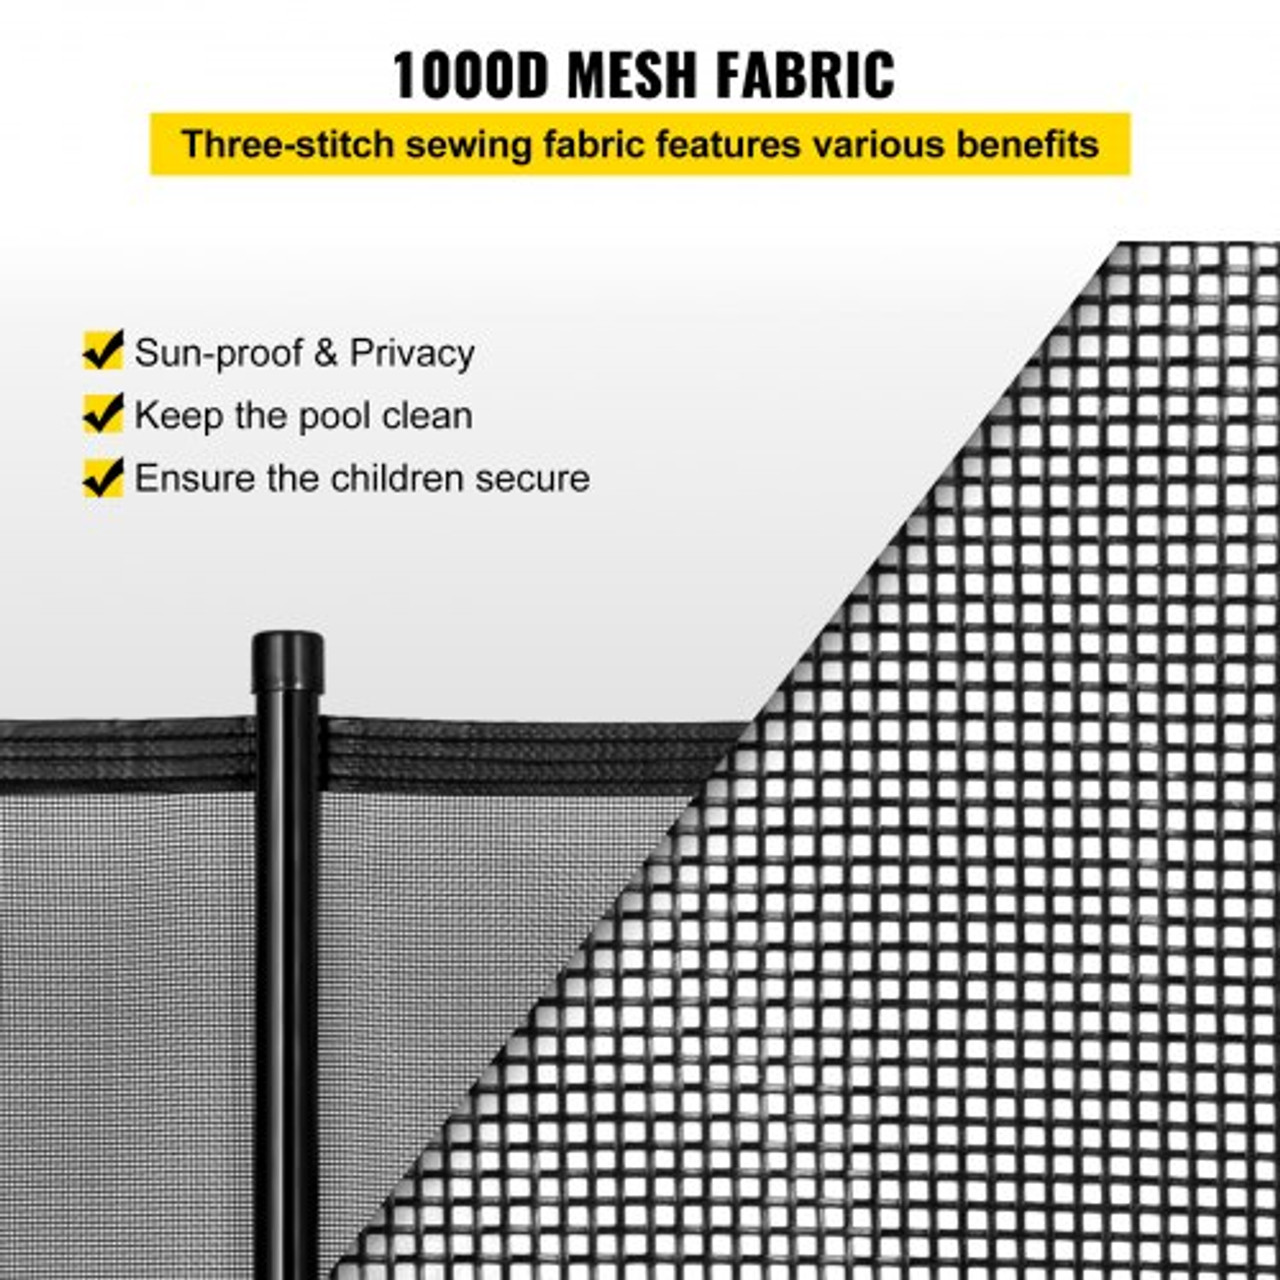 Pool Fence for Inground Pools, 4' x 12' - Pool Fence, Black Mesh Barrier - Removable DIY Pool Fencing, with Section Kit (4' x 12')